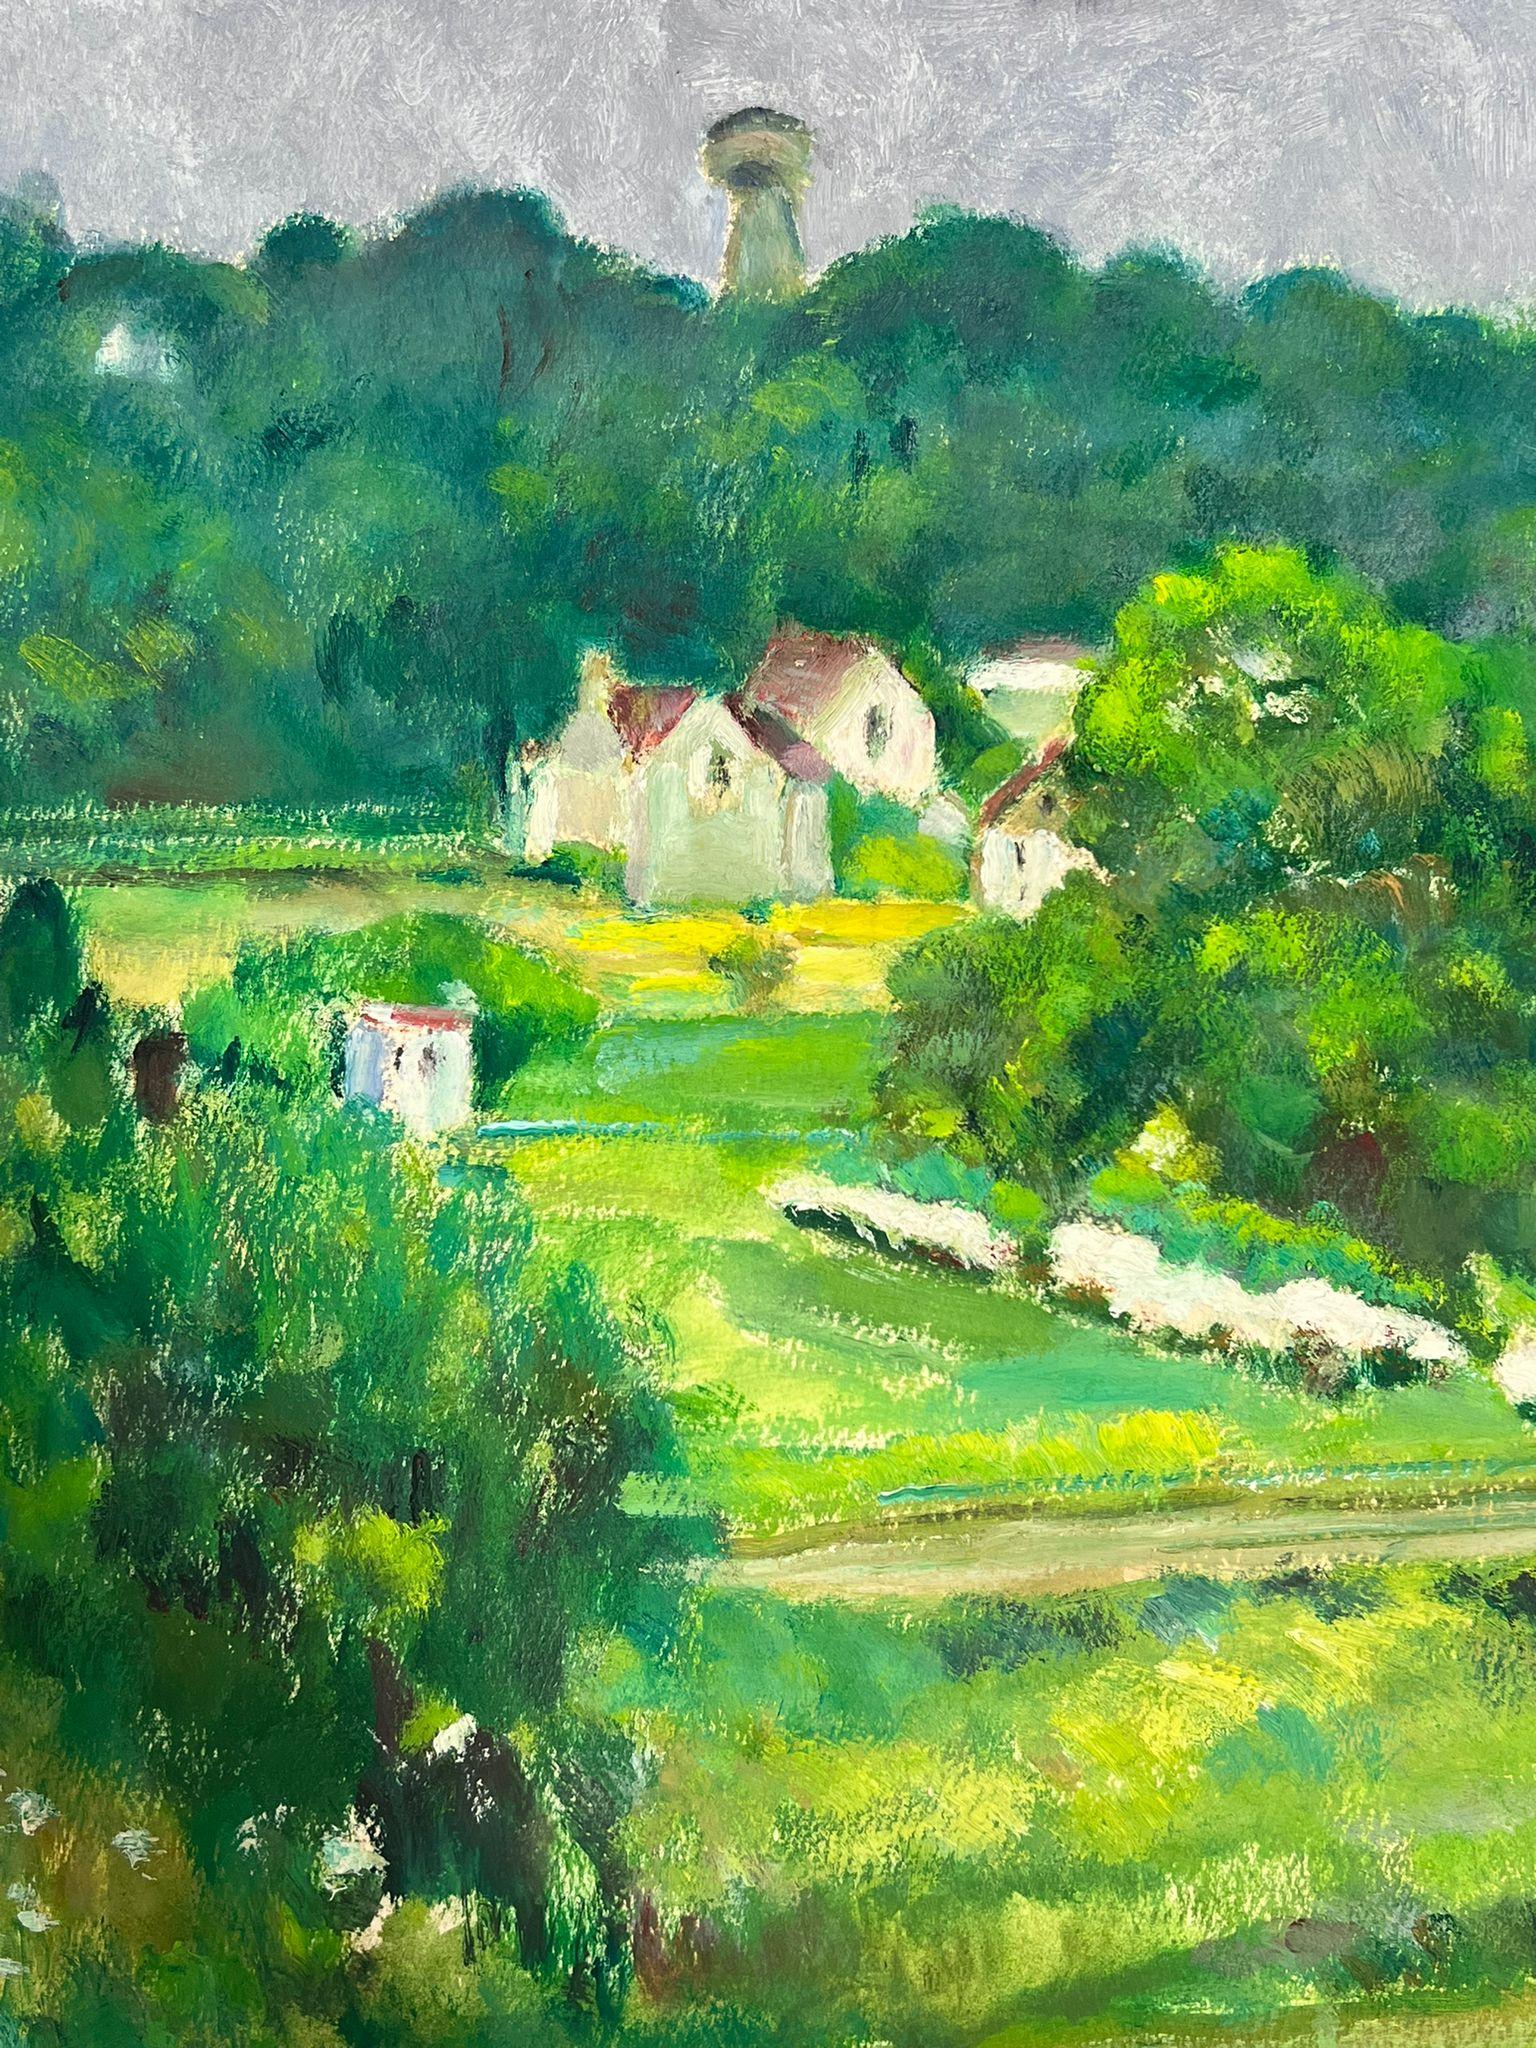 Red Roof Village In Bright Green Field Landscape's French Landscape - Painting by Louise Alix